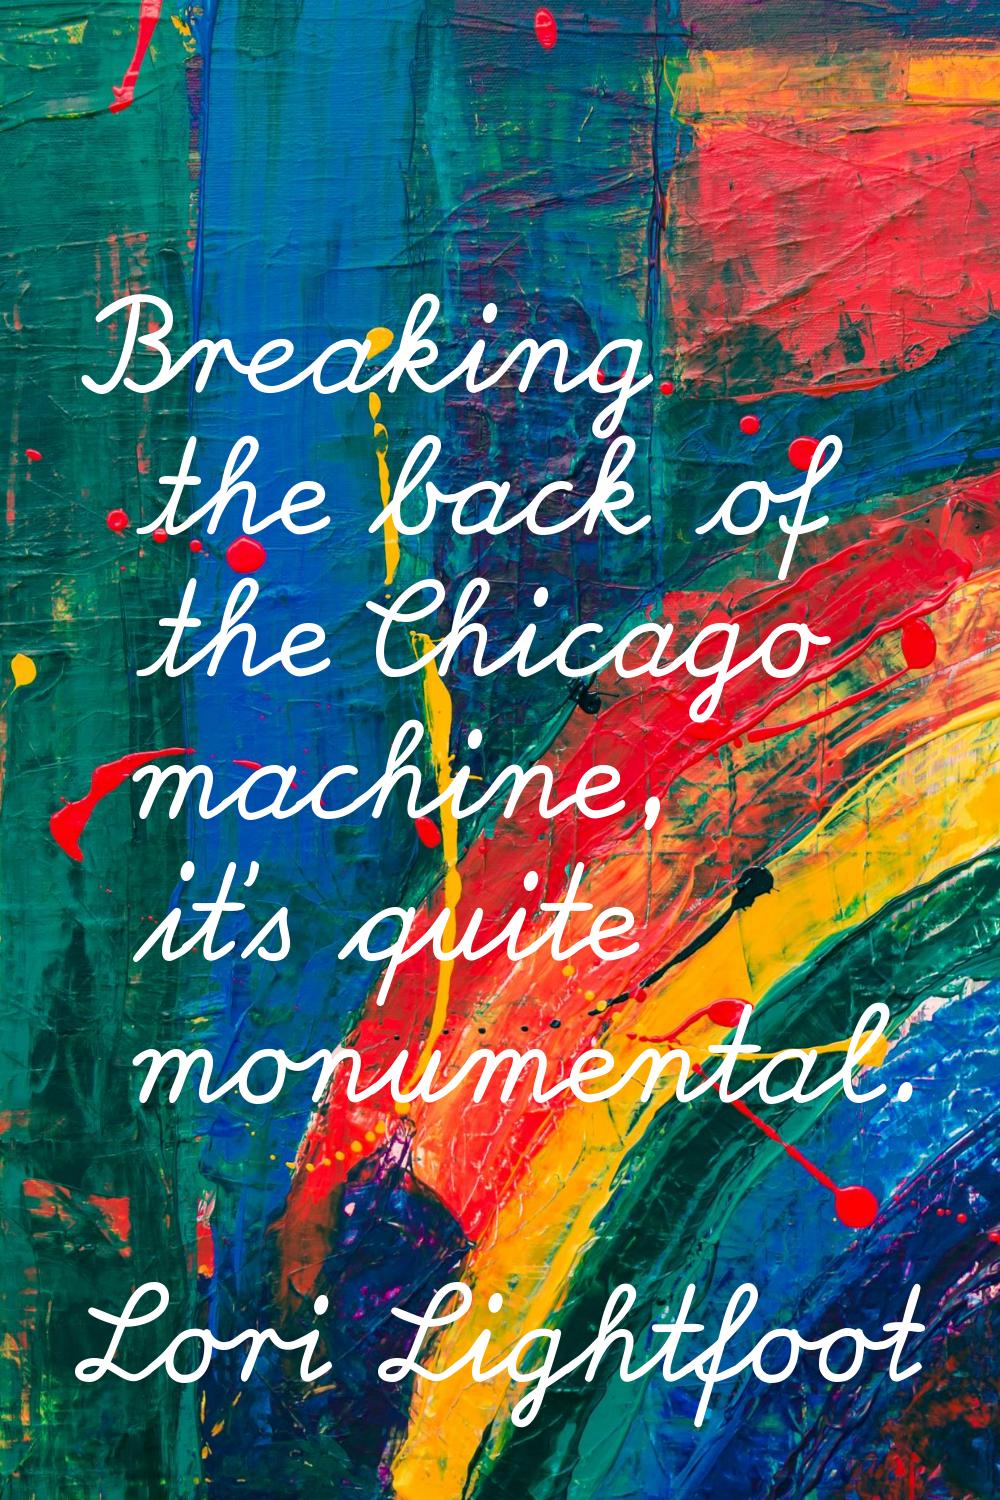 Breaking the back of the Chicago machine, it's quite monumental.